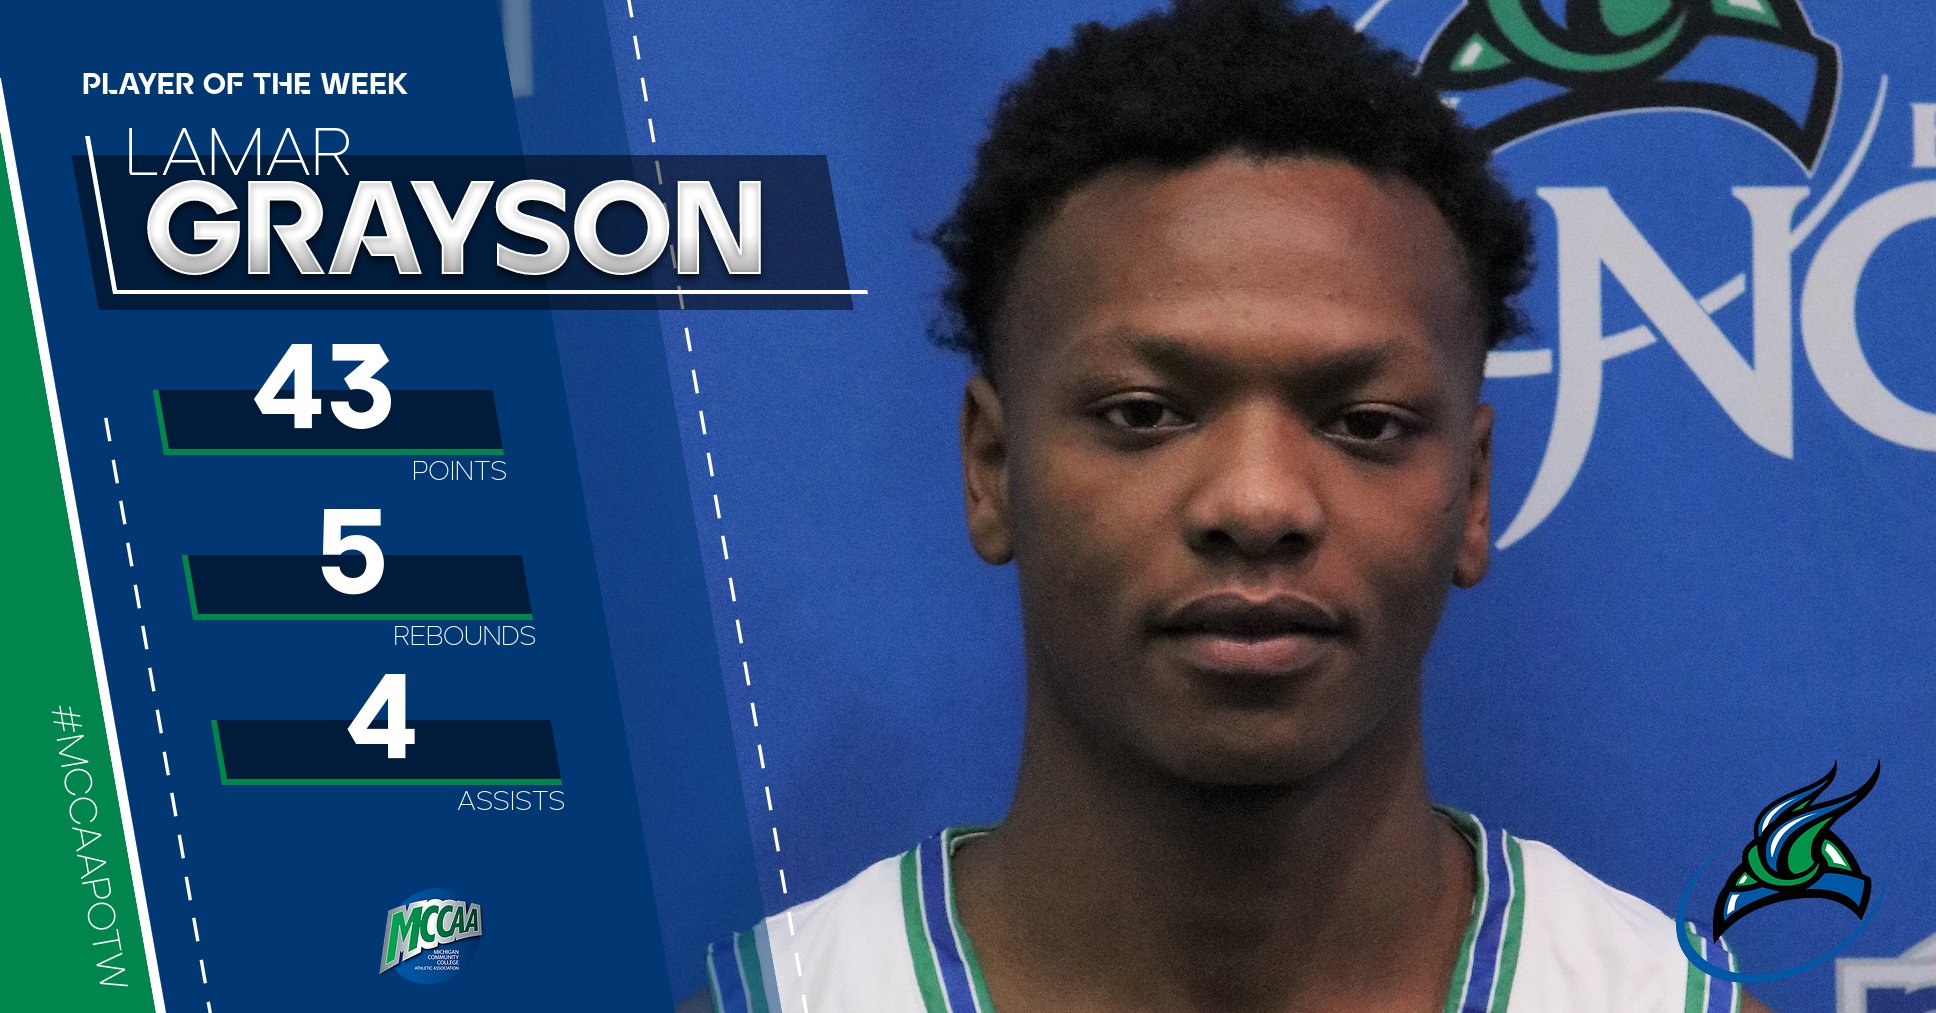 Lamar Grayson, MCCAA Northern Conference Men's Basketball Player of the Week, Bay College